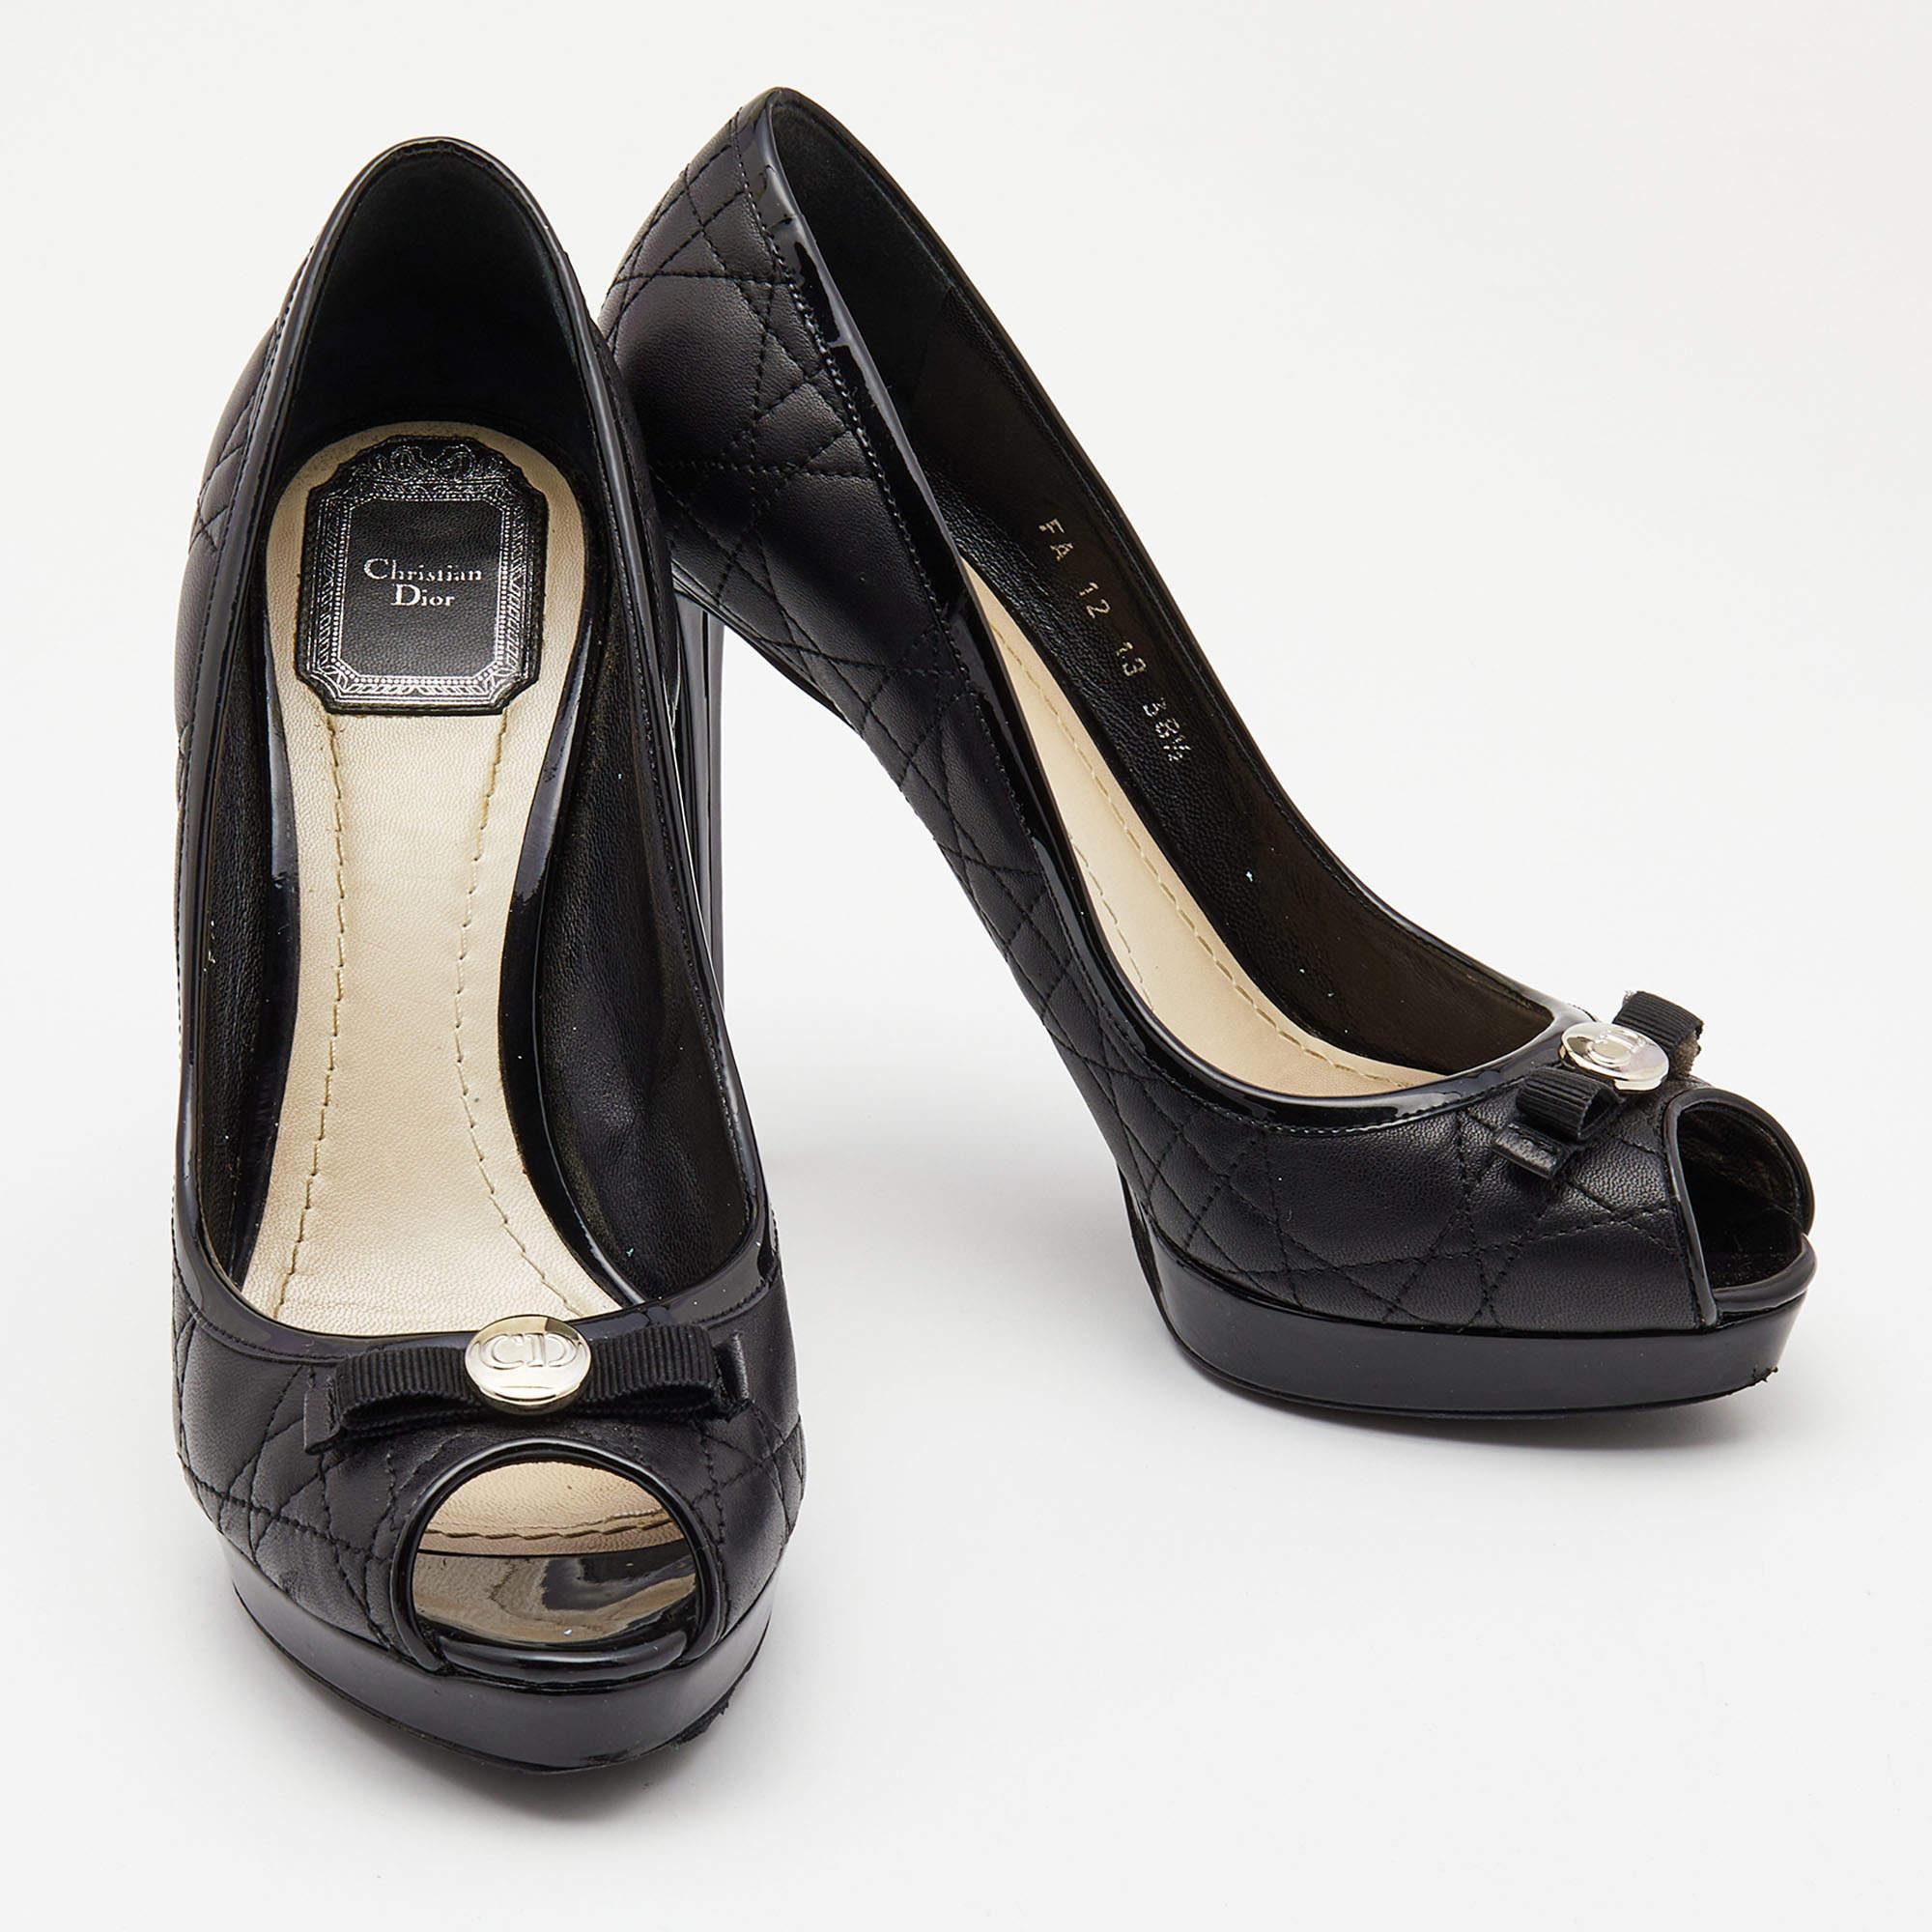 Dior Black Cannage Quilted And Patent Leather Bow Pumps Size 38.5 In Fair Condition For Sale In Dubai, Al Qouz 2